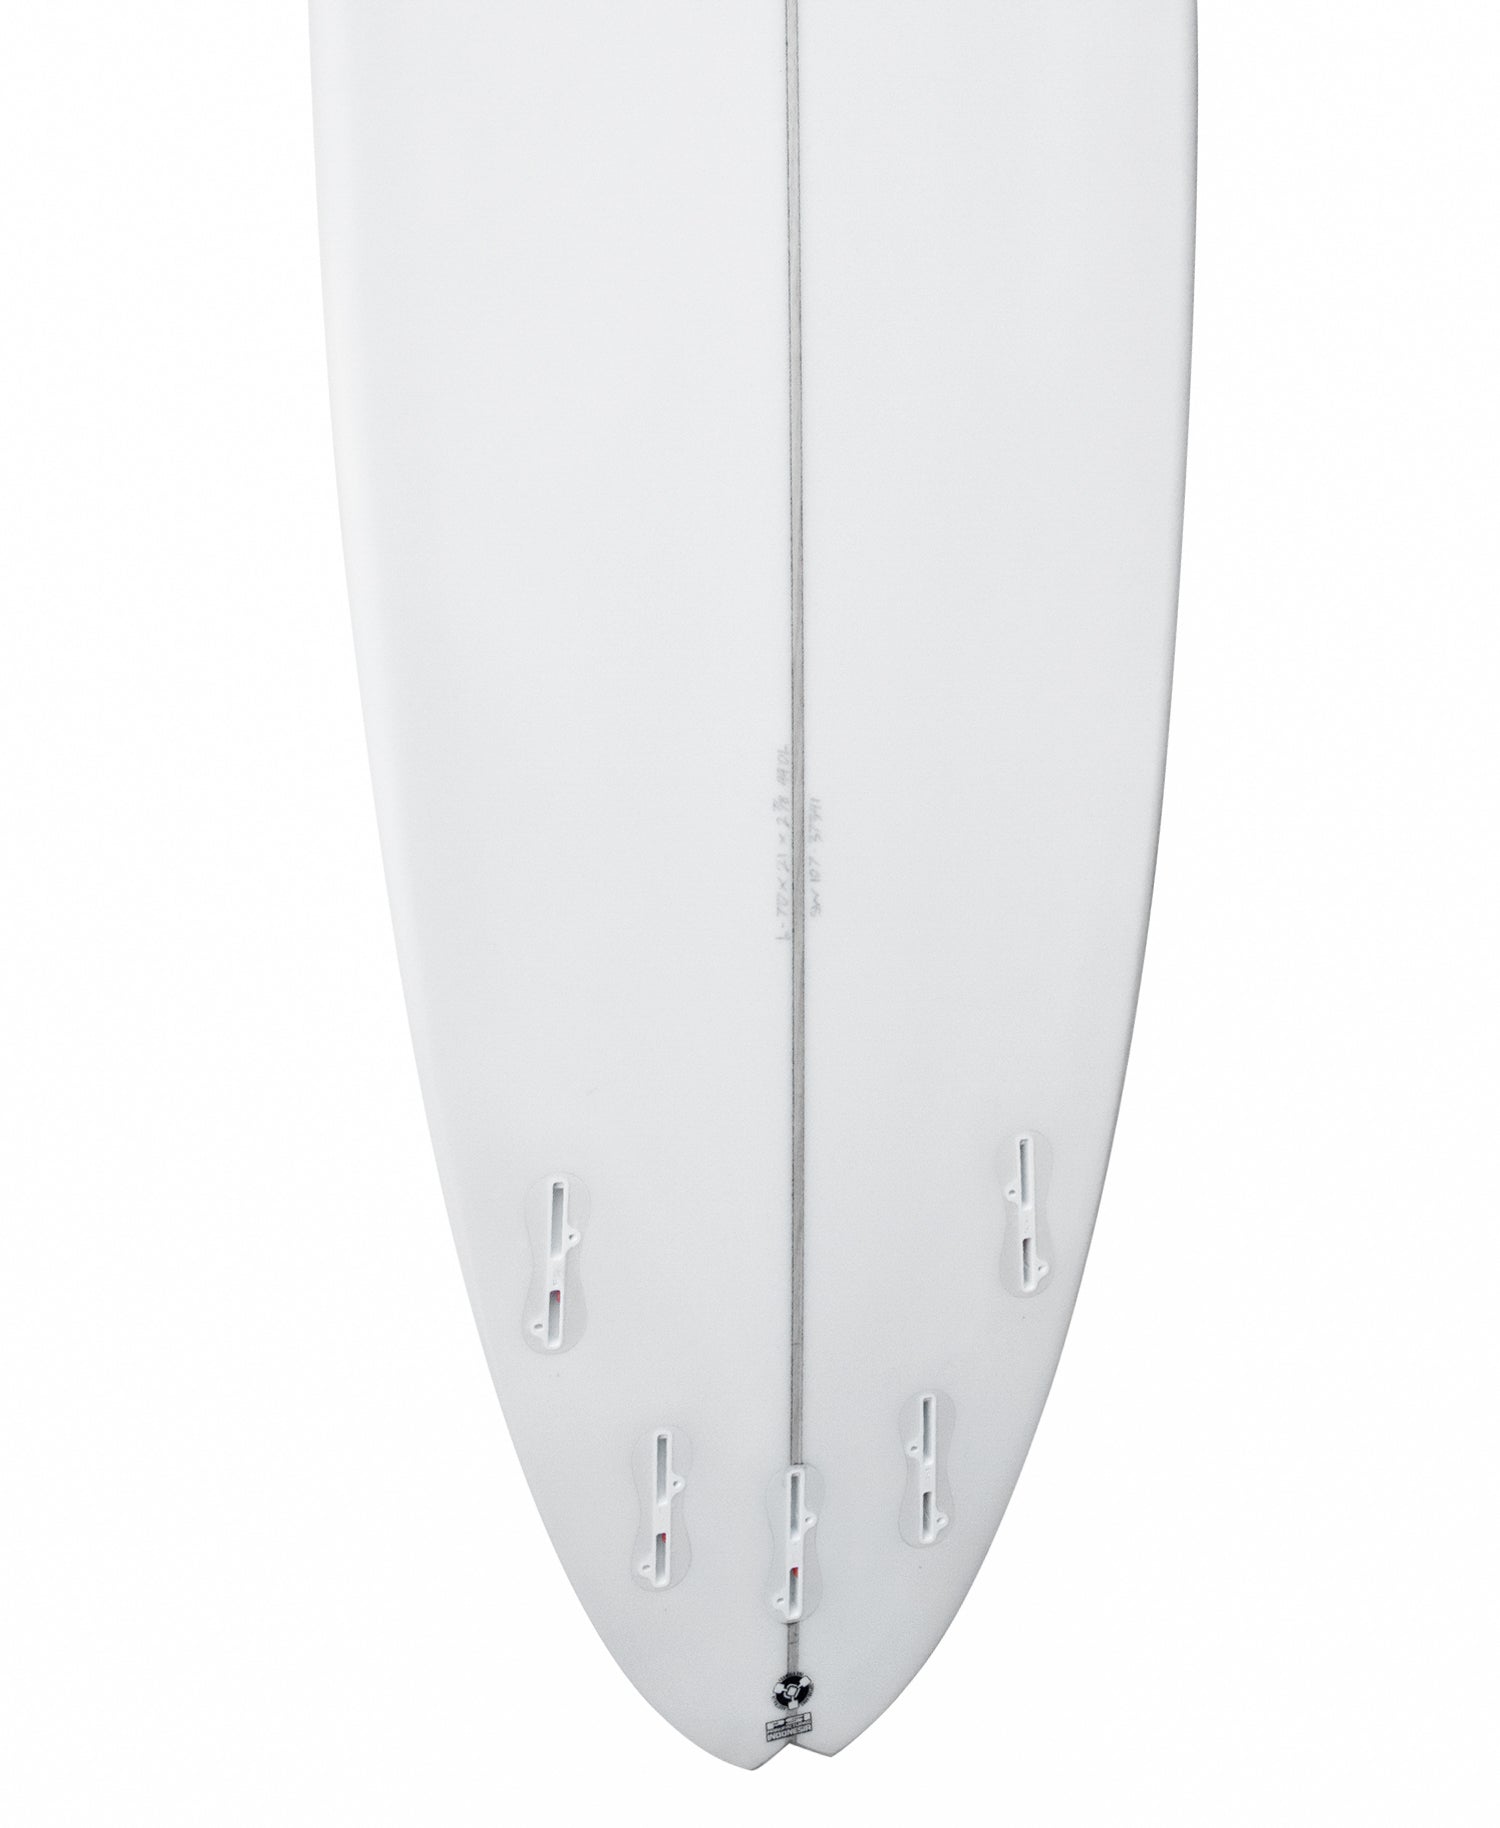 VAMPIRATE 'FAR OUT GROOVY' MID LENGTH SURFBOARD